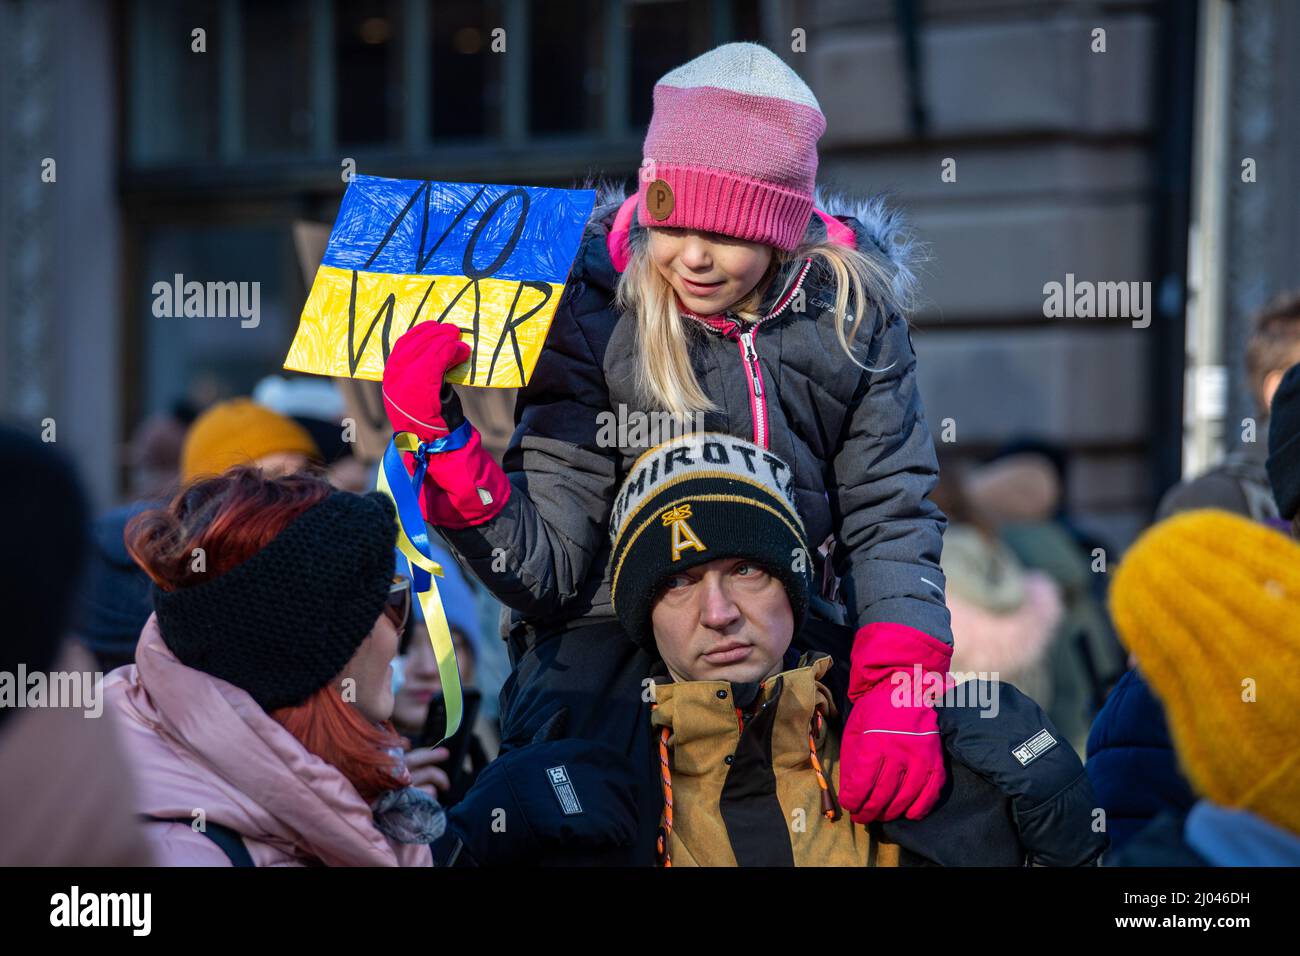 No war. Young girl holding a sign at protest against Ukraine war in Helsinki, Finland. Stock Photo